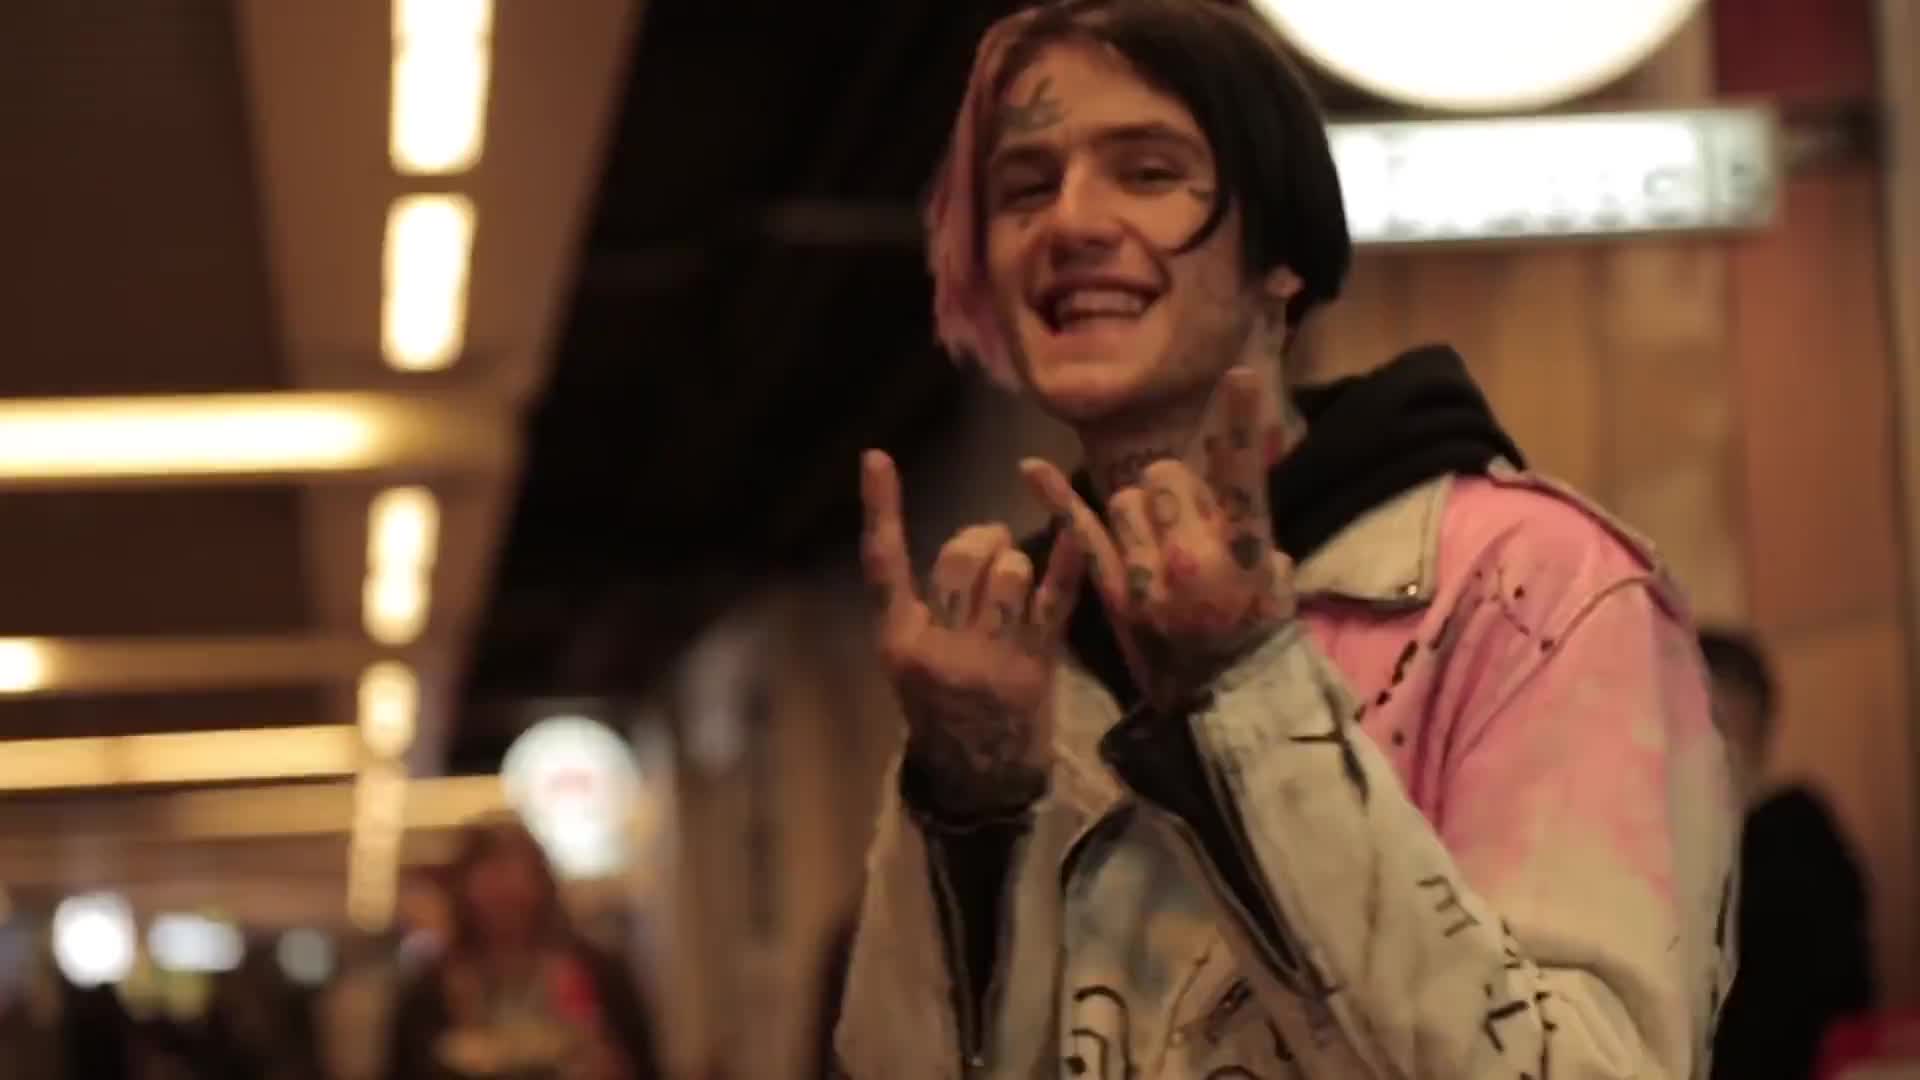 Lil Peep Pc Wallpapers Wallpaper Cave